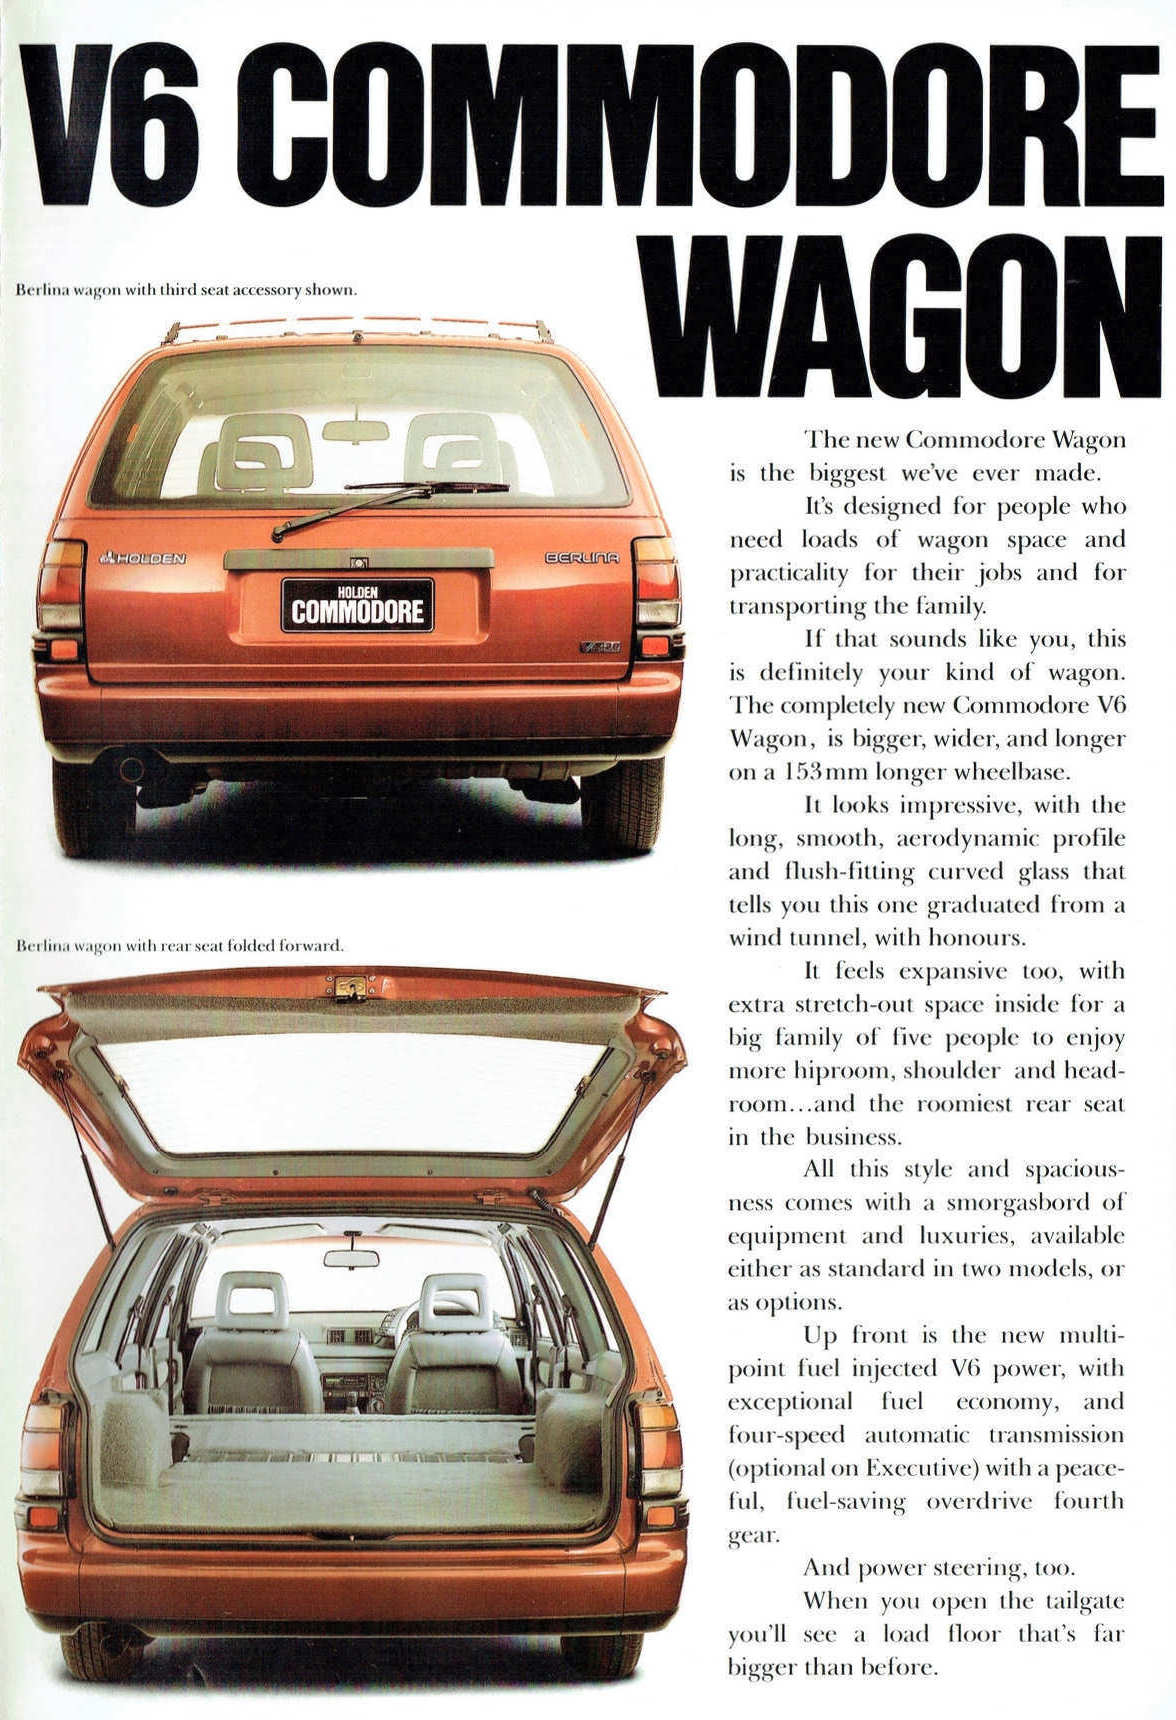 1989_Holden_Commodore_VN-12